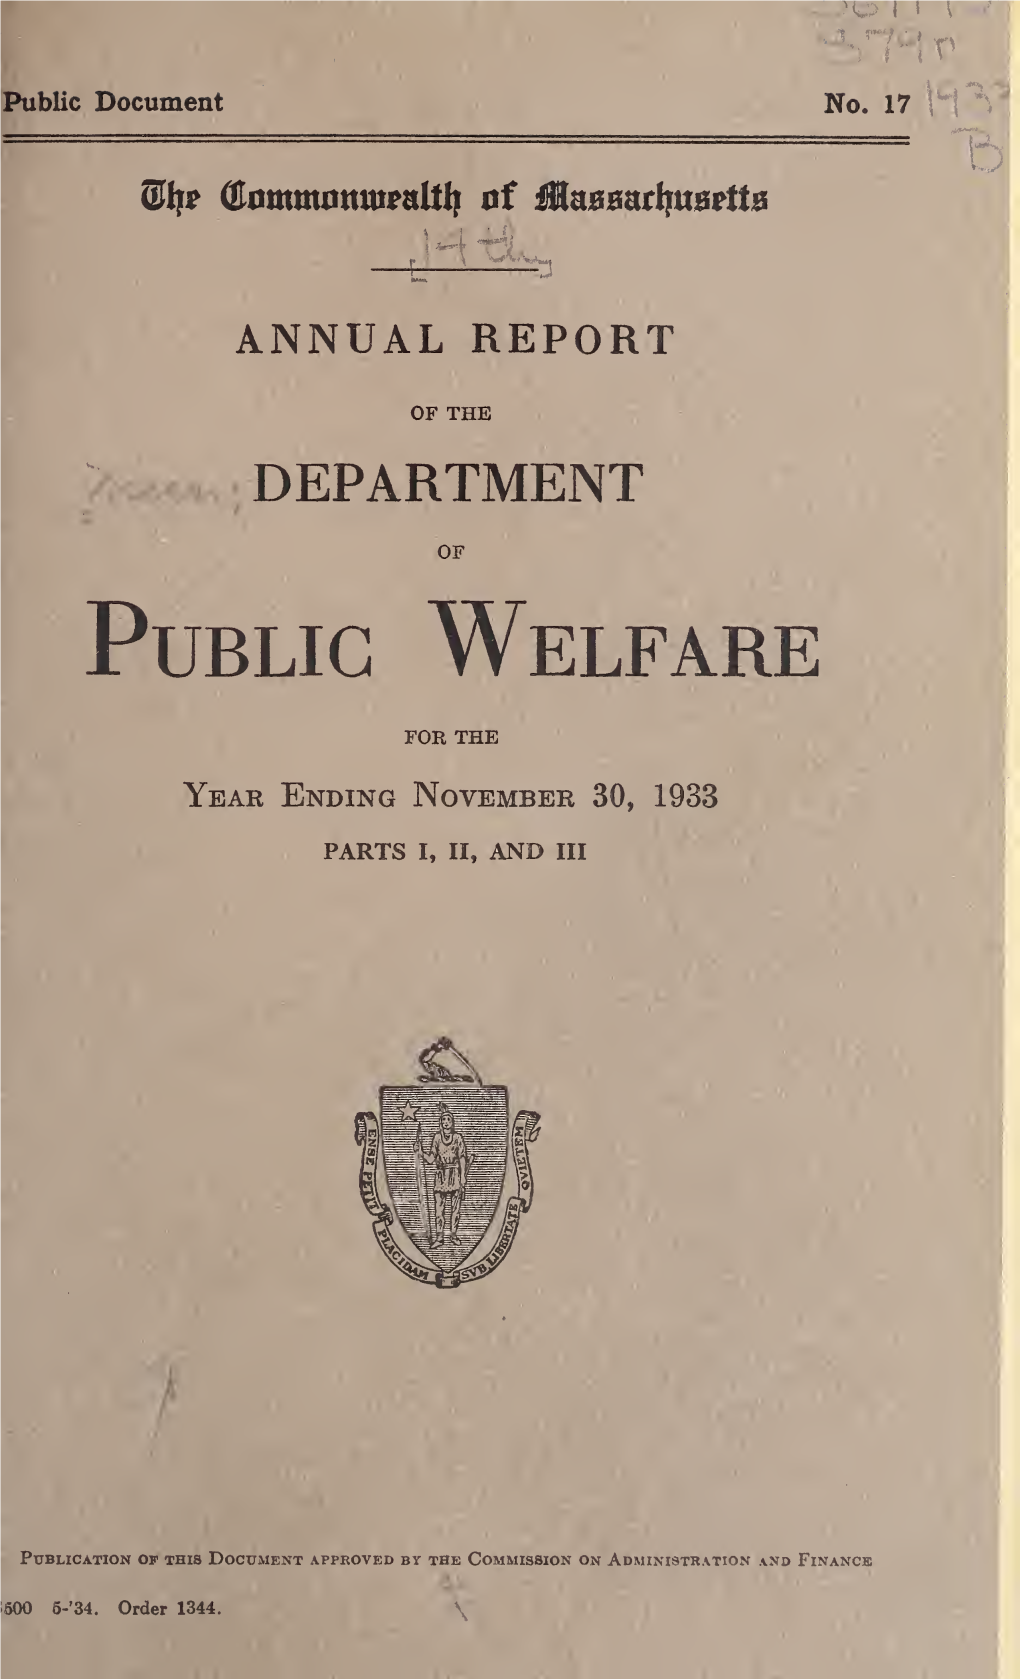 Annual Report of the Department of Public Welfare, Covering the Year from December 1, 1932, to November 30, 1933, Is Herewith Respectfully Presented